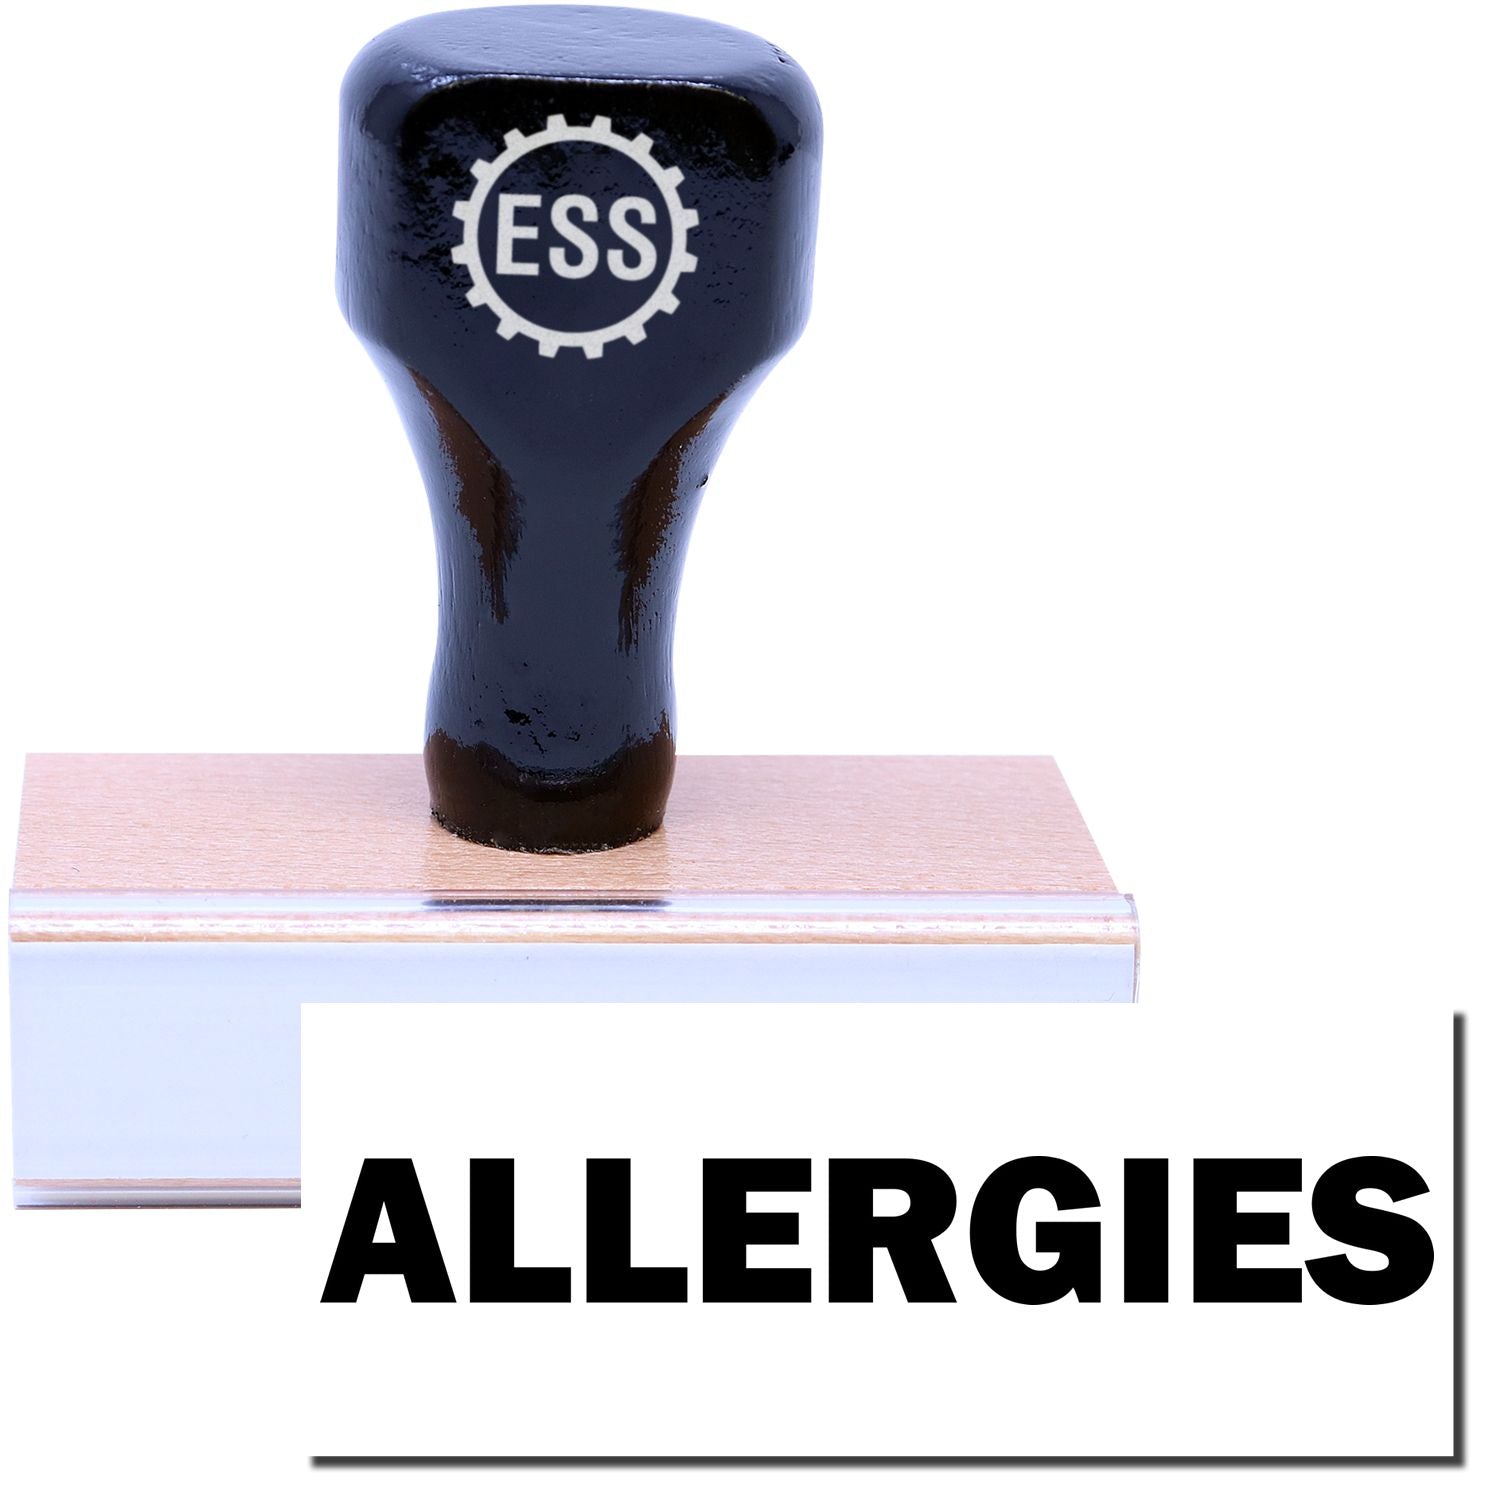 A stock office rubber stamp with a stamped image showing how the text "ALLERGIES" in bold font is displayed after stamping.